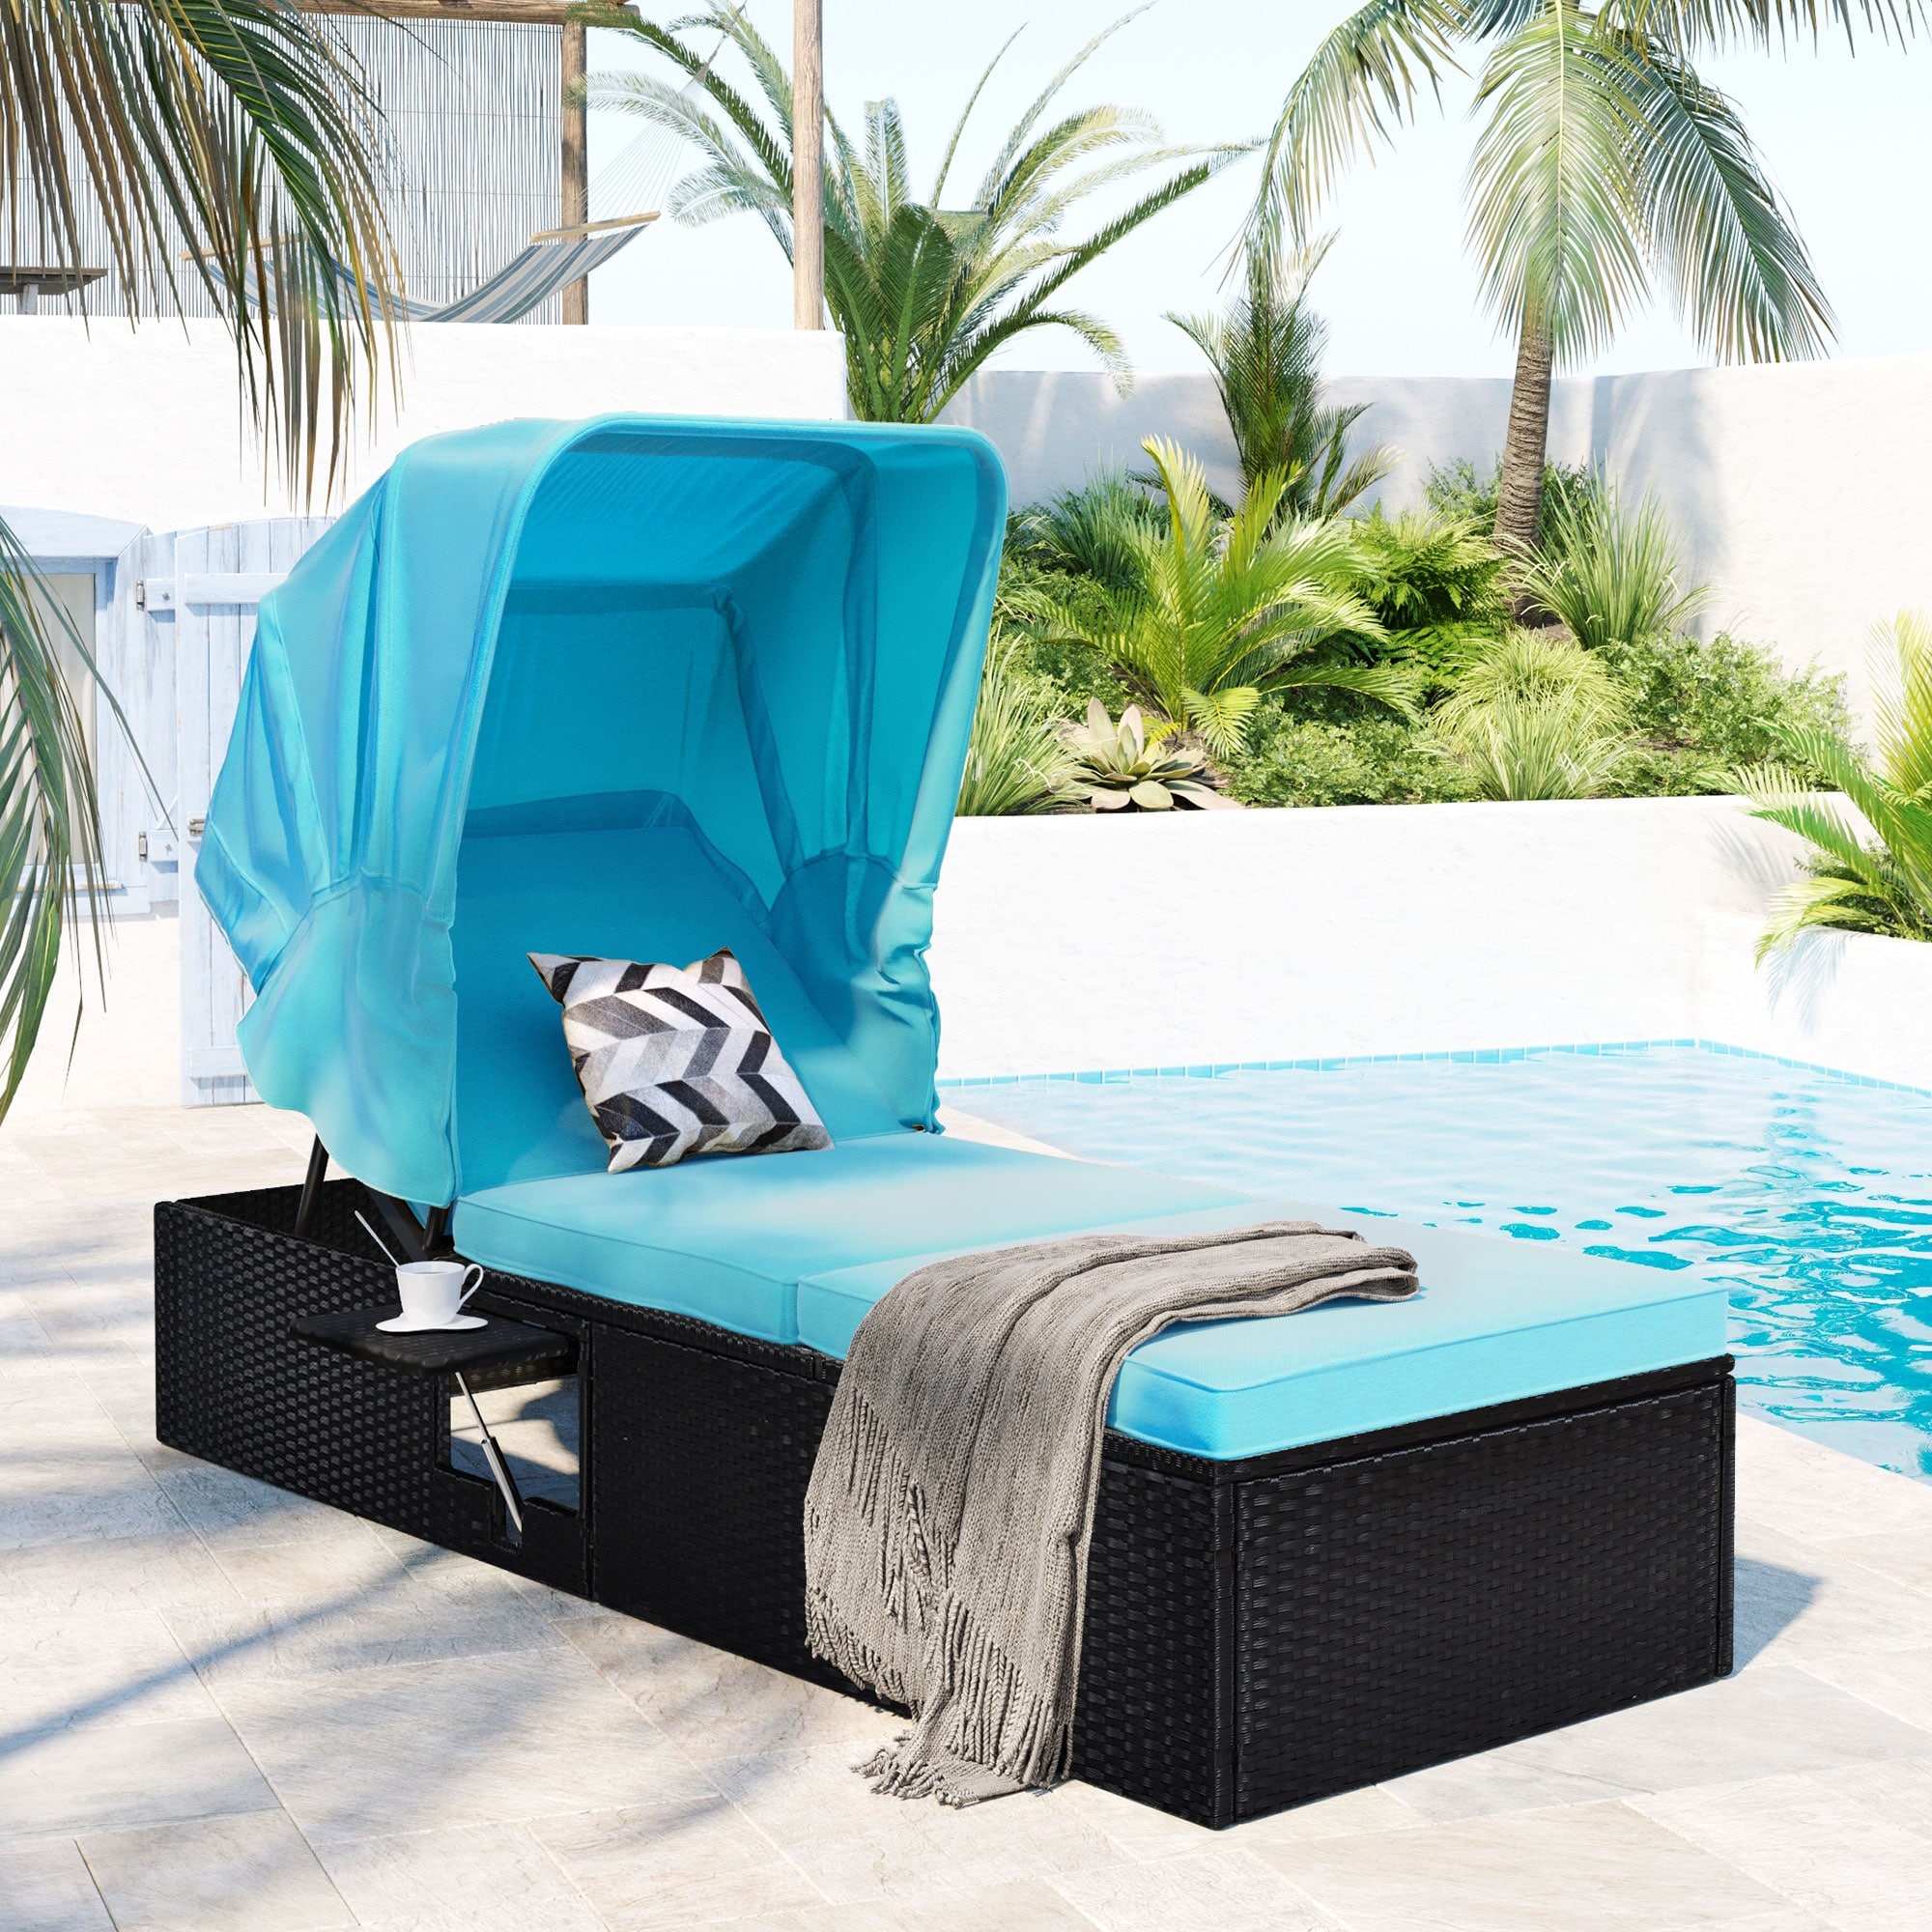 77 All Weather Adjustable Reclining Chaise Lounge Poolside Canopy Sunbed